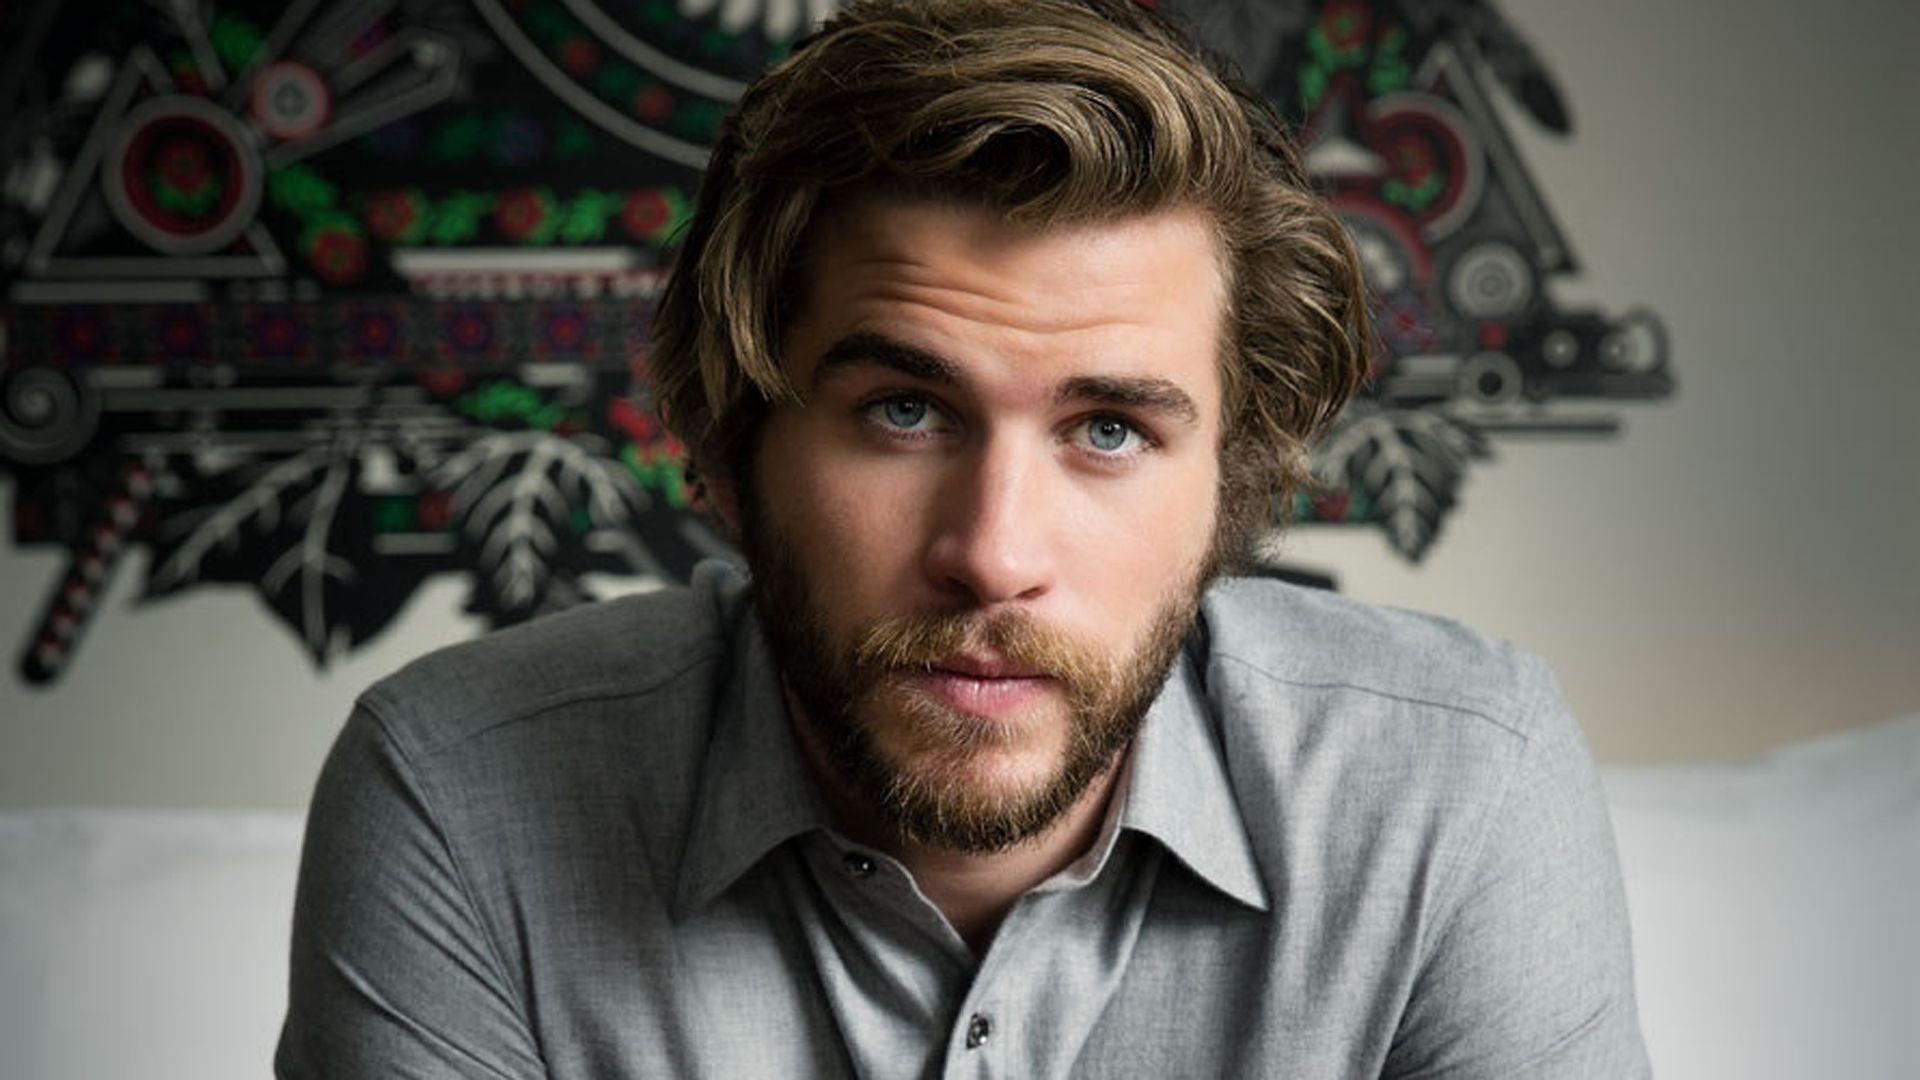 Liam Hemsworth Wallpaper High Resolution and Quality Download